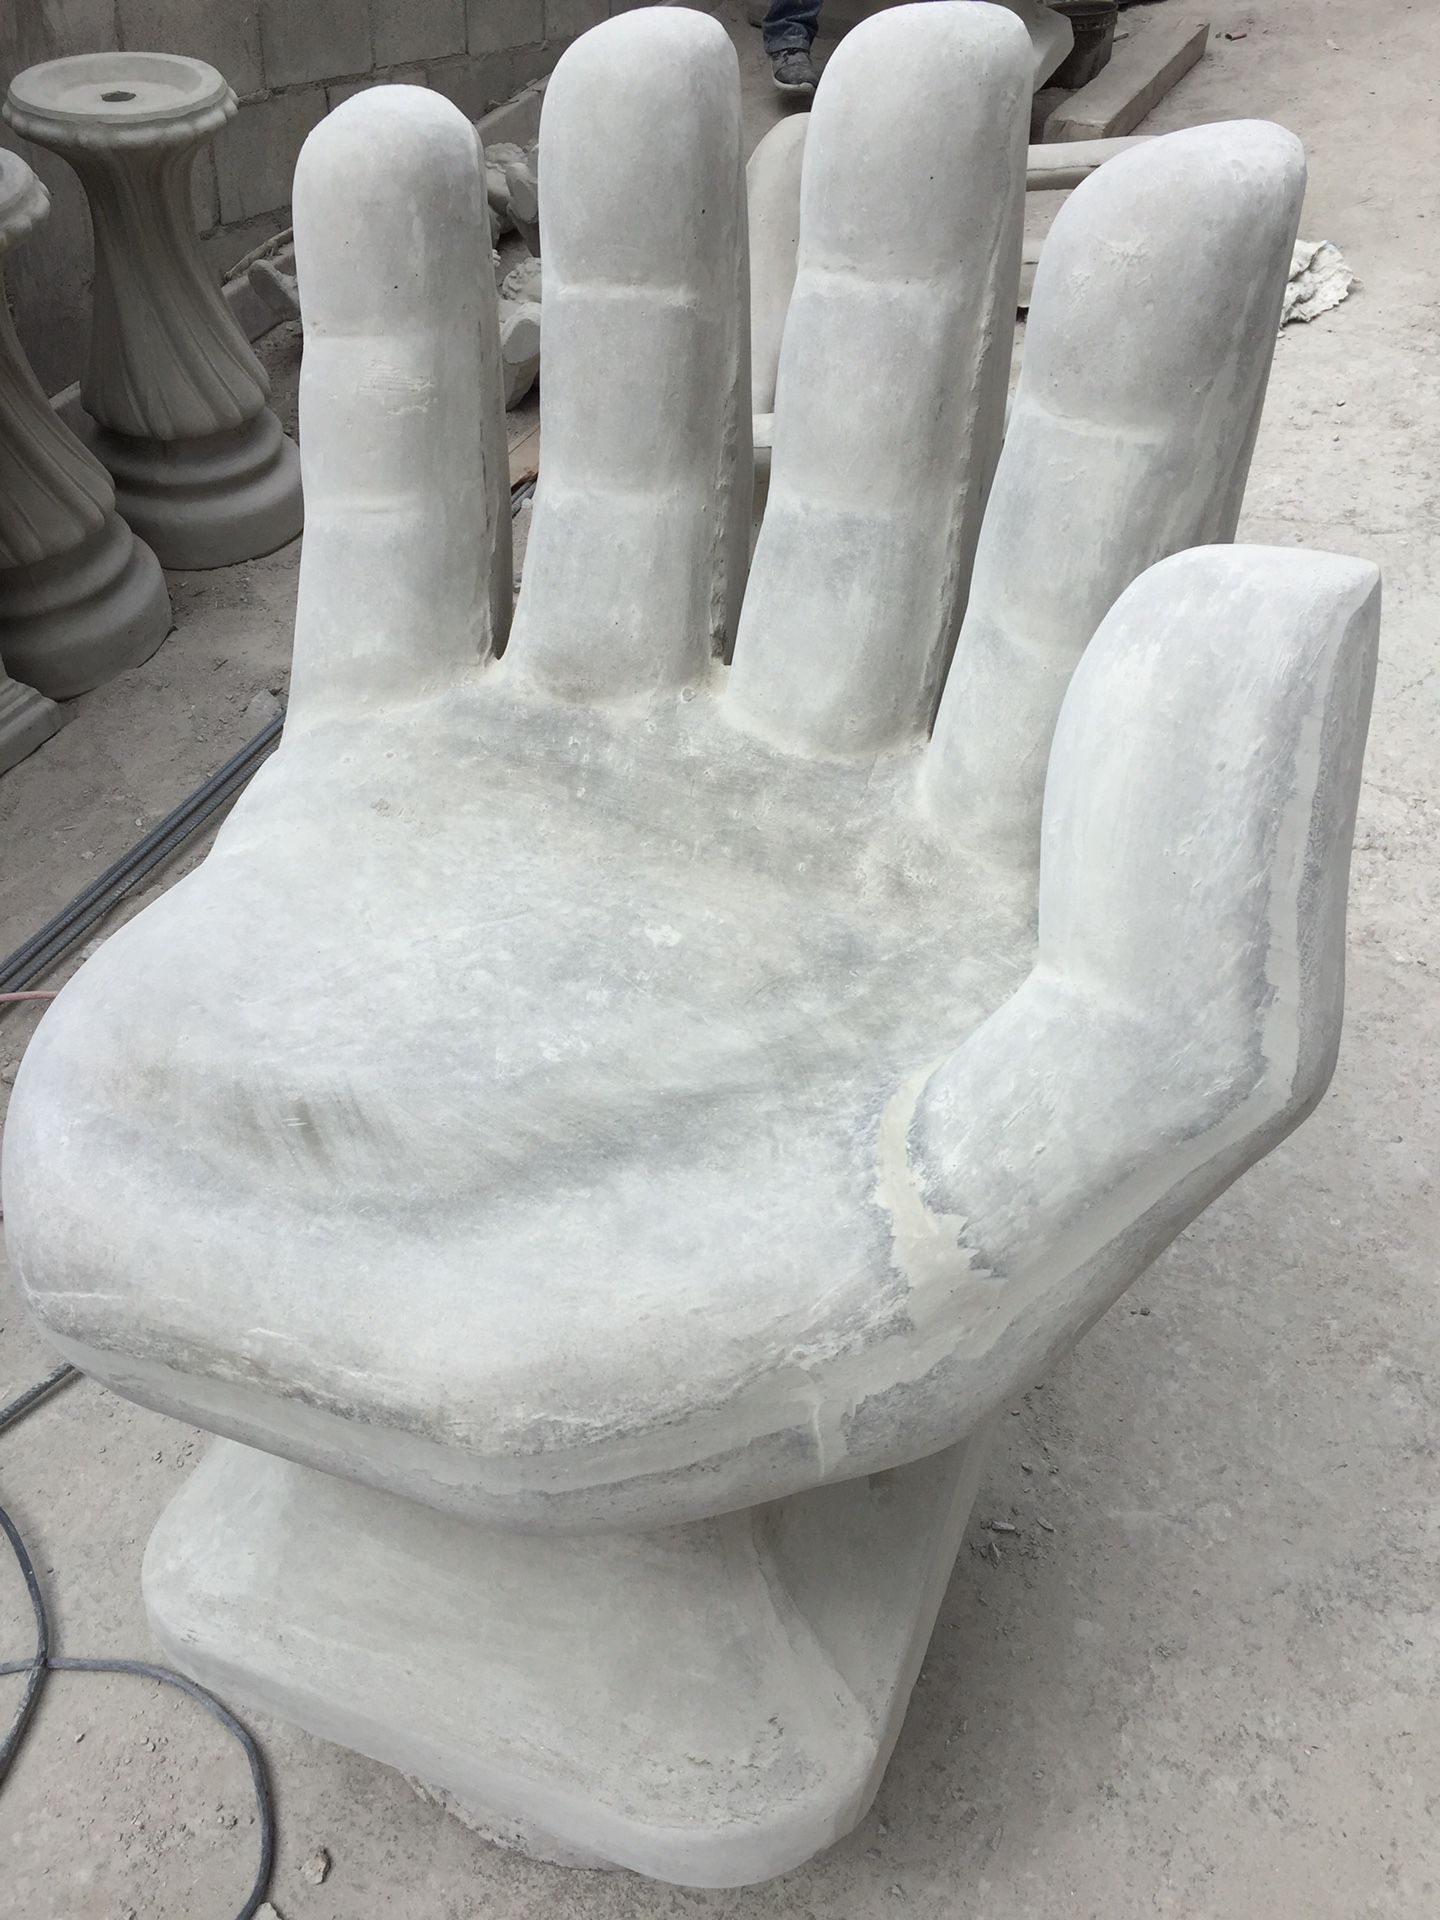 Patio furniture, hand chair and table set, Garden art and statues